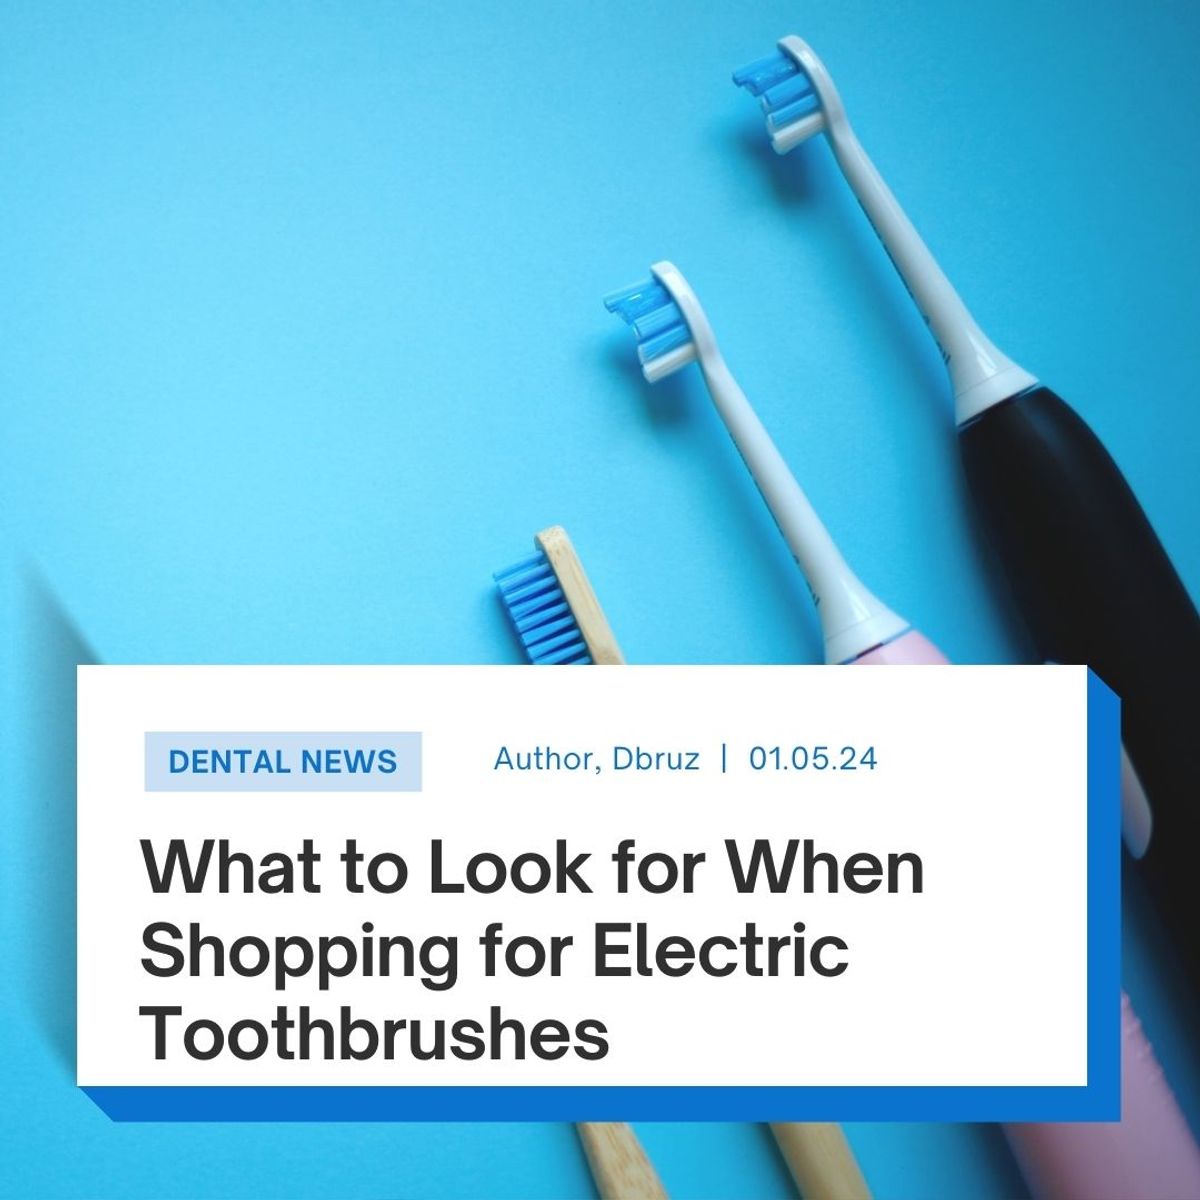 What to Look for When Shopping for Electric Toothbrushes